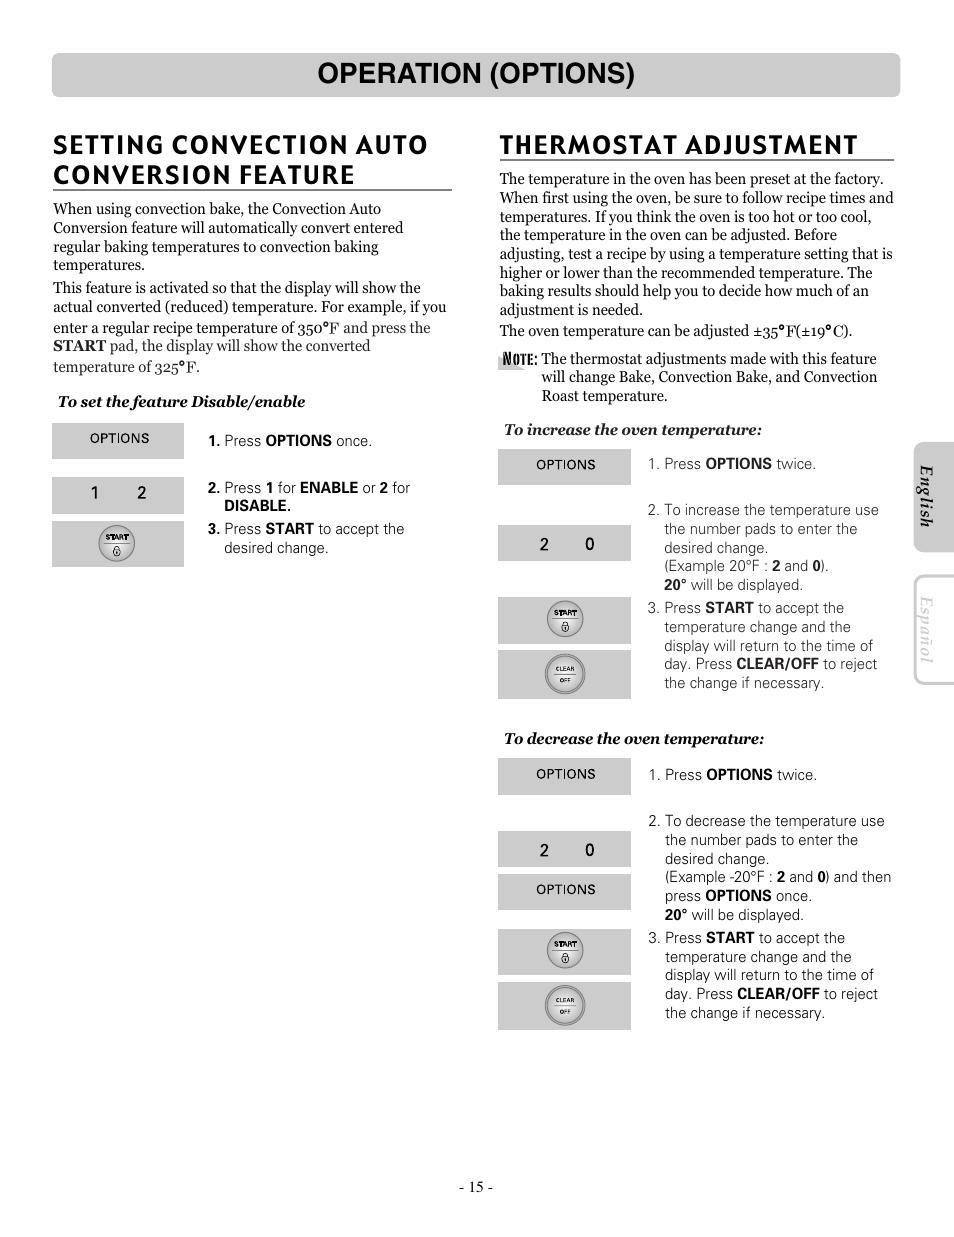 Operation (options), Setting convection auto conversion feature, Thermostat adjustment | LG LRE30755SW User Manual | Page 15 / 36